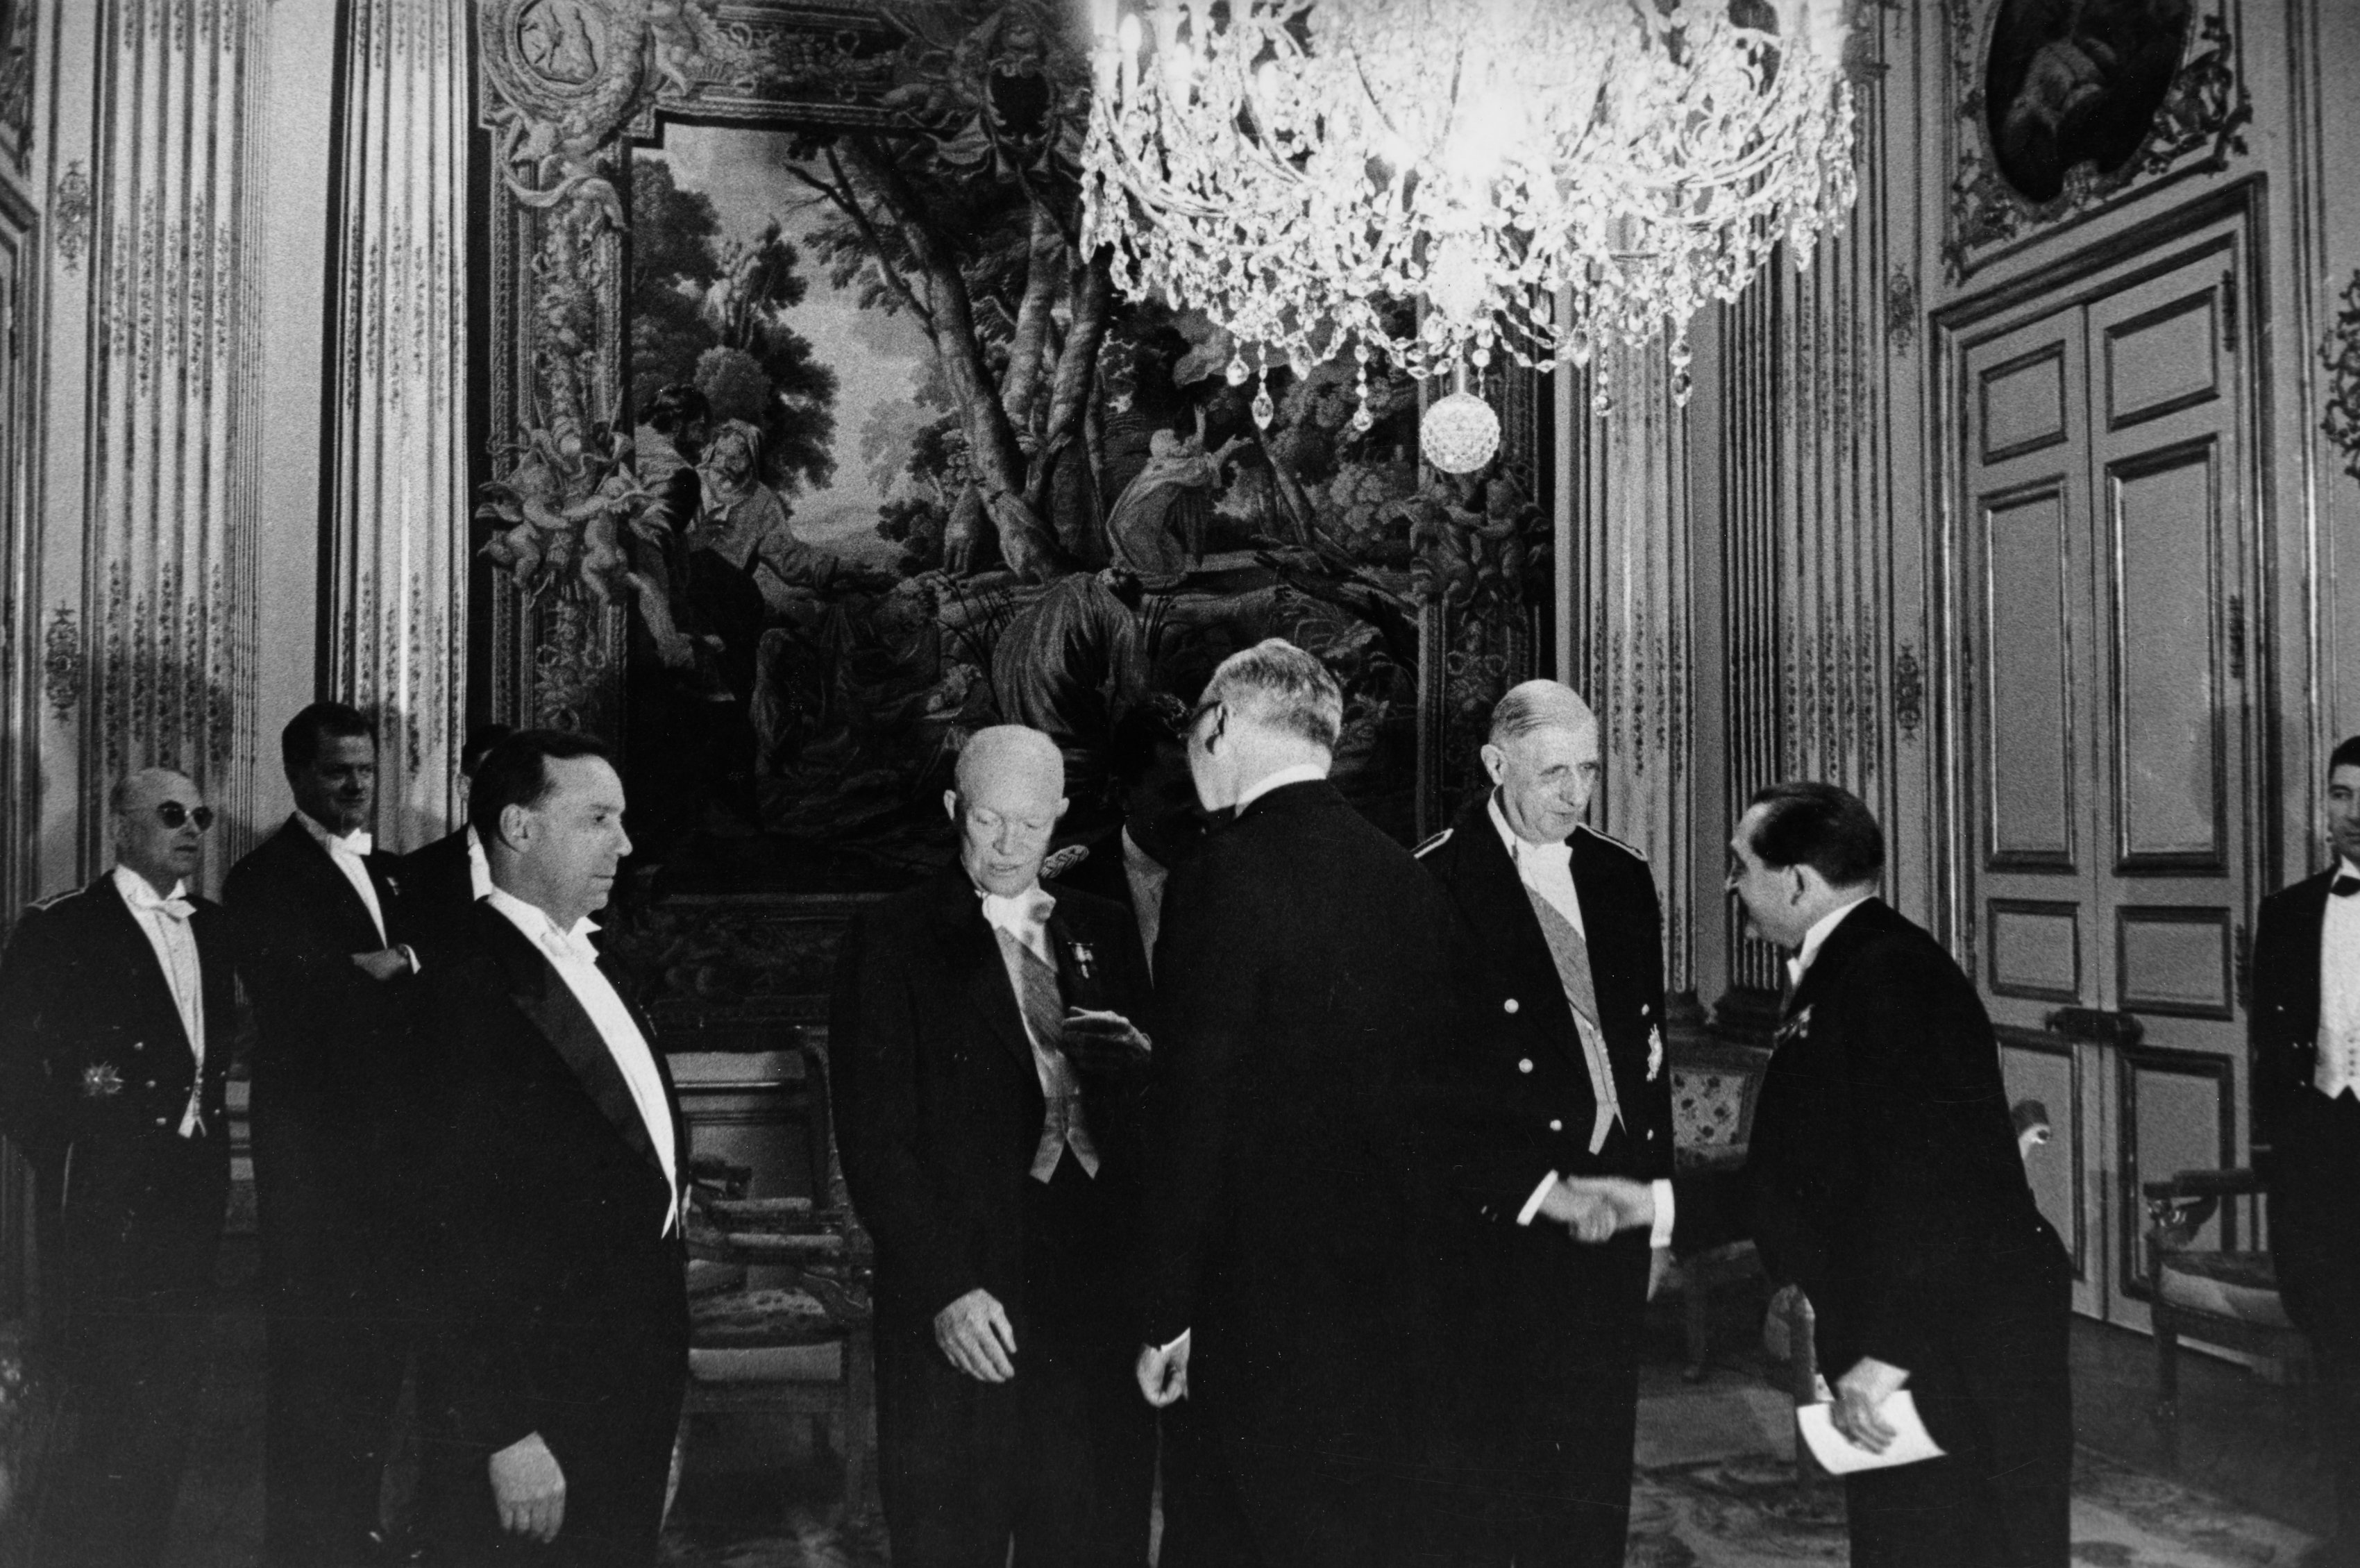 Presidents Dwight D. Eisenhower and Charles de Gaulle Greeting Guests